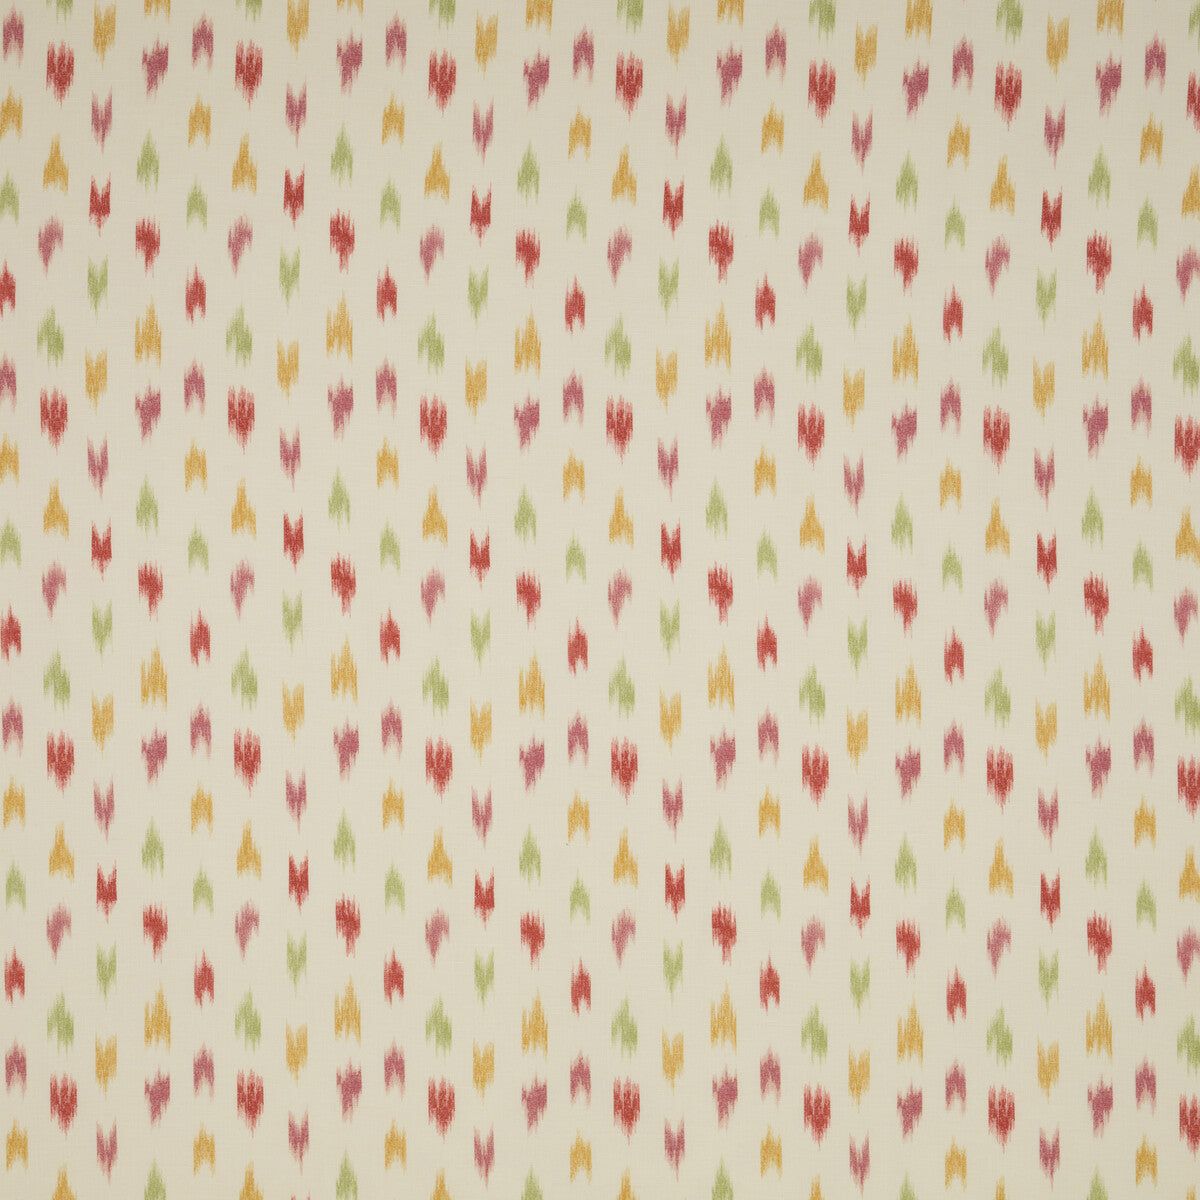 Bombay Ikat fabric in red/pink color - pattern 8018124.719.0 - by Brunschwig &amp; Fils in the Cevennes collection